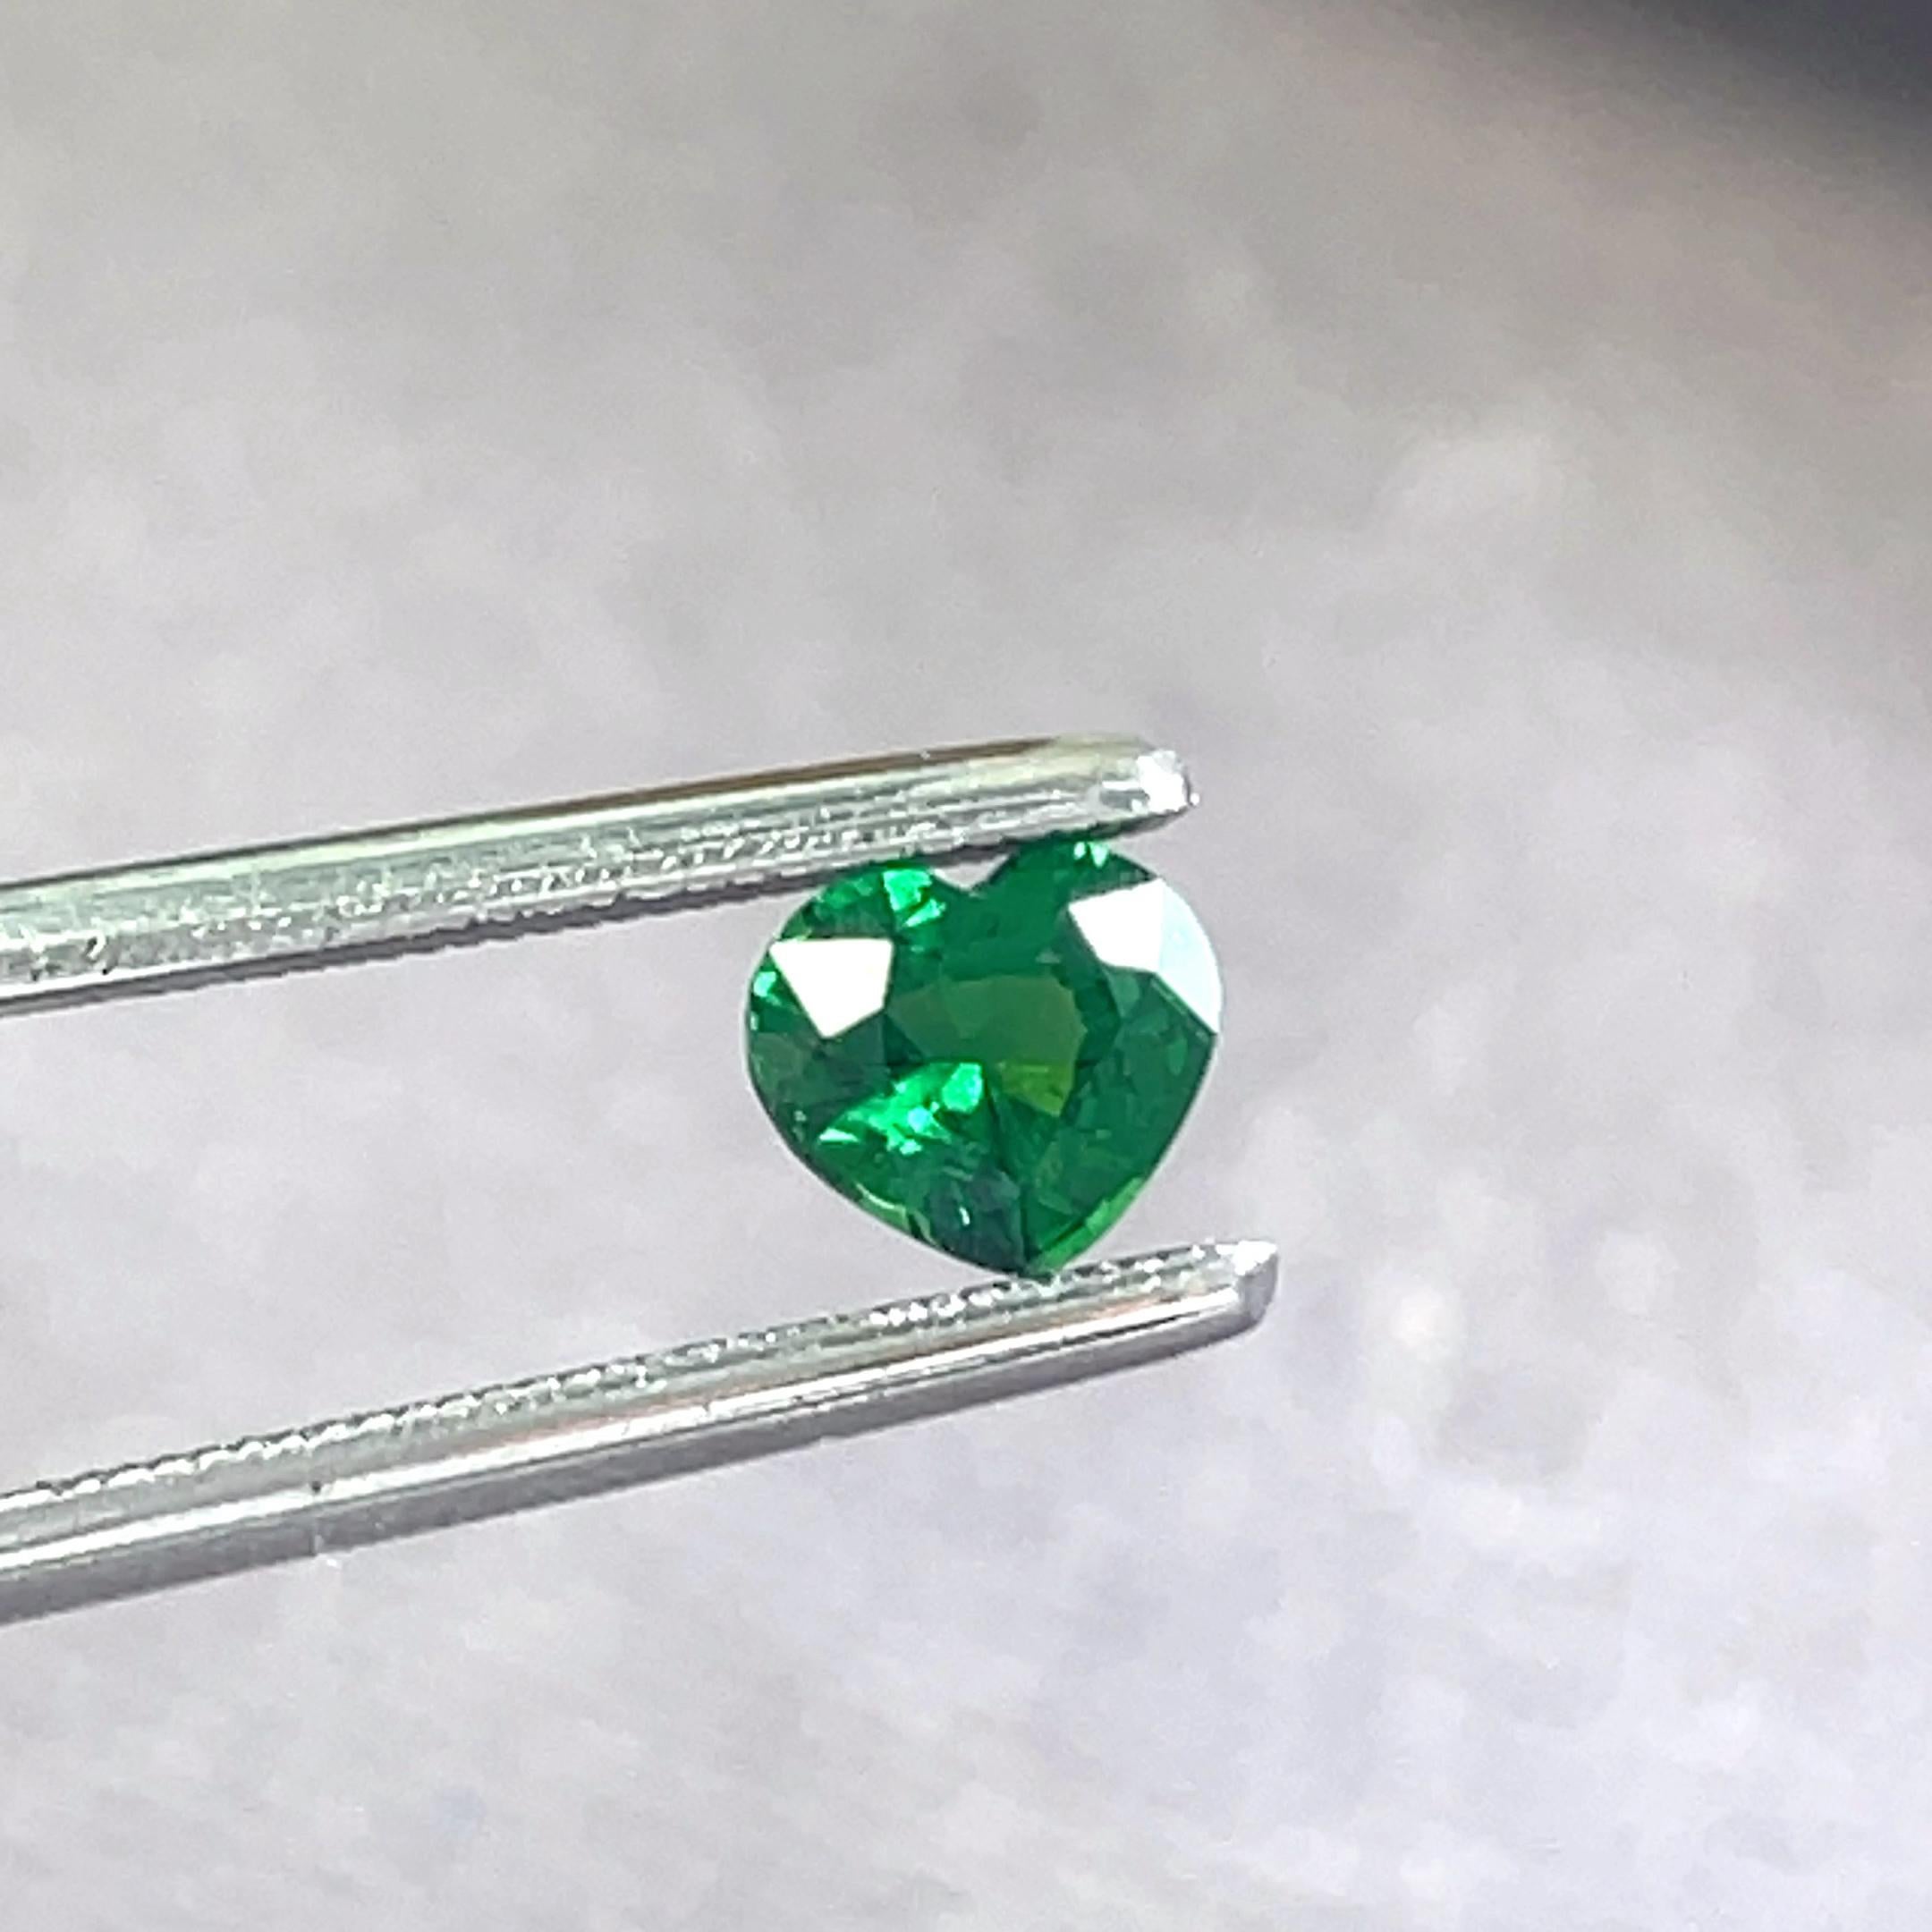 This 0.77 carat heart-shaped tsavorite gemstone was expertly and passionately crafted to represent the essence of vigor and rejuvenation. 

An ideal talisman for anyone looking to draw luck and optimism into their life because of its rich green